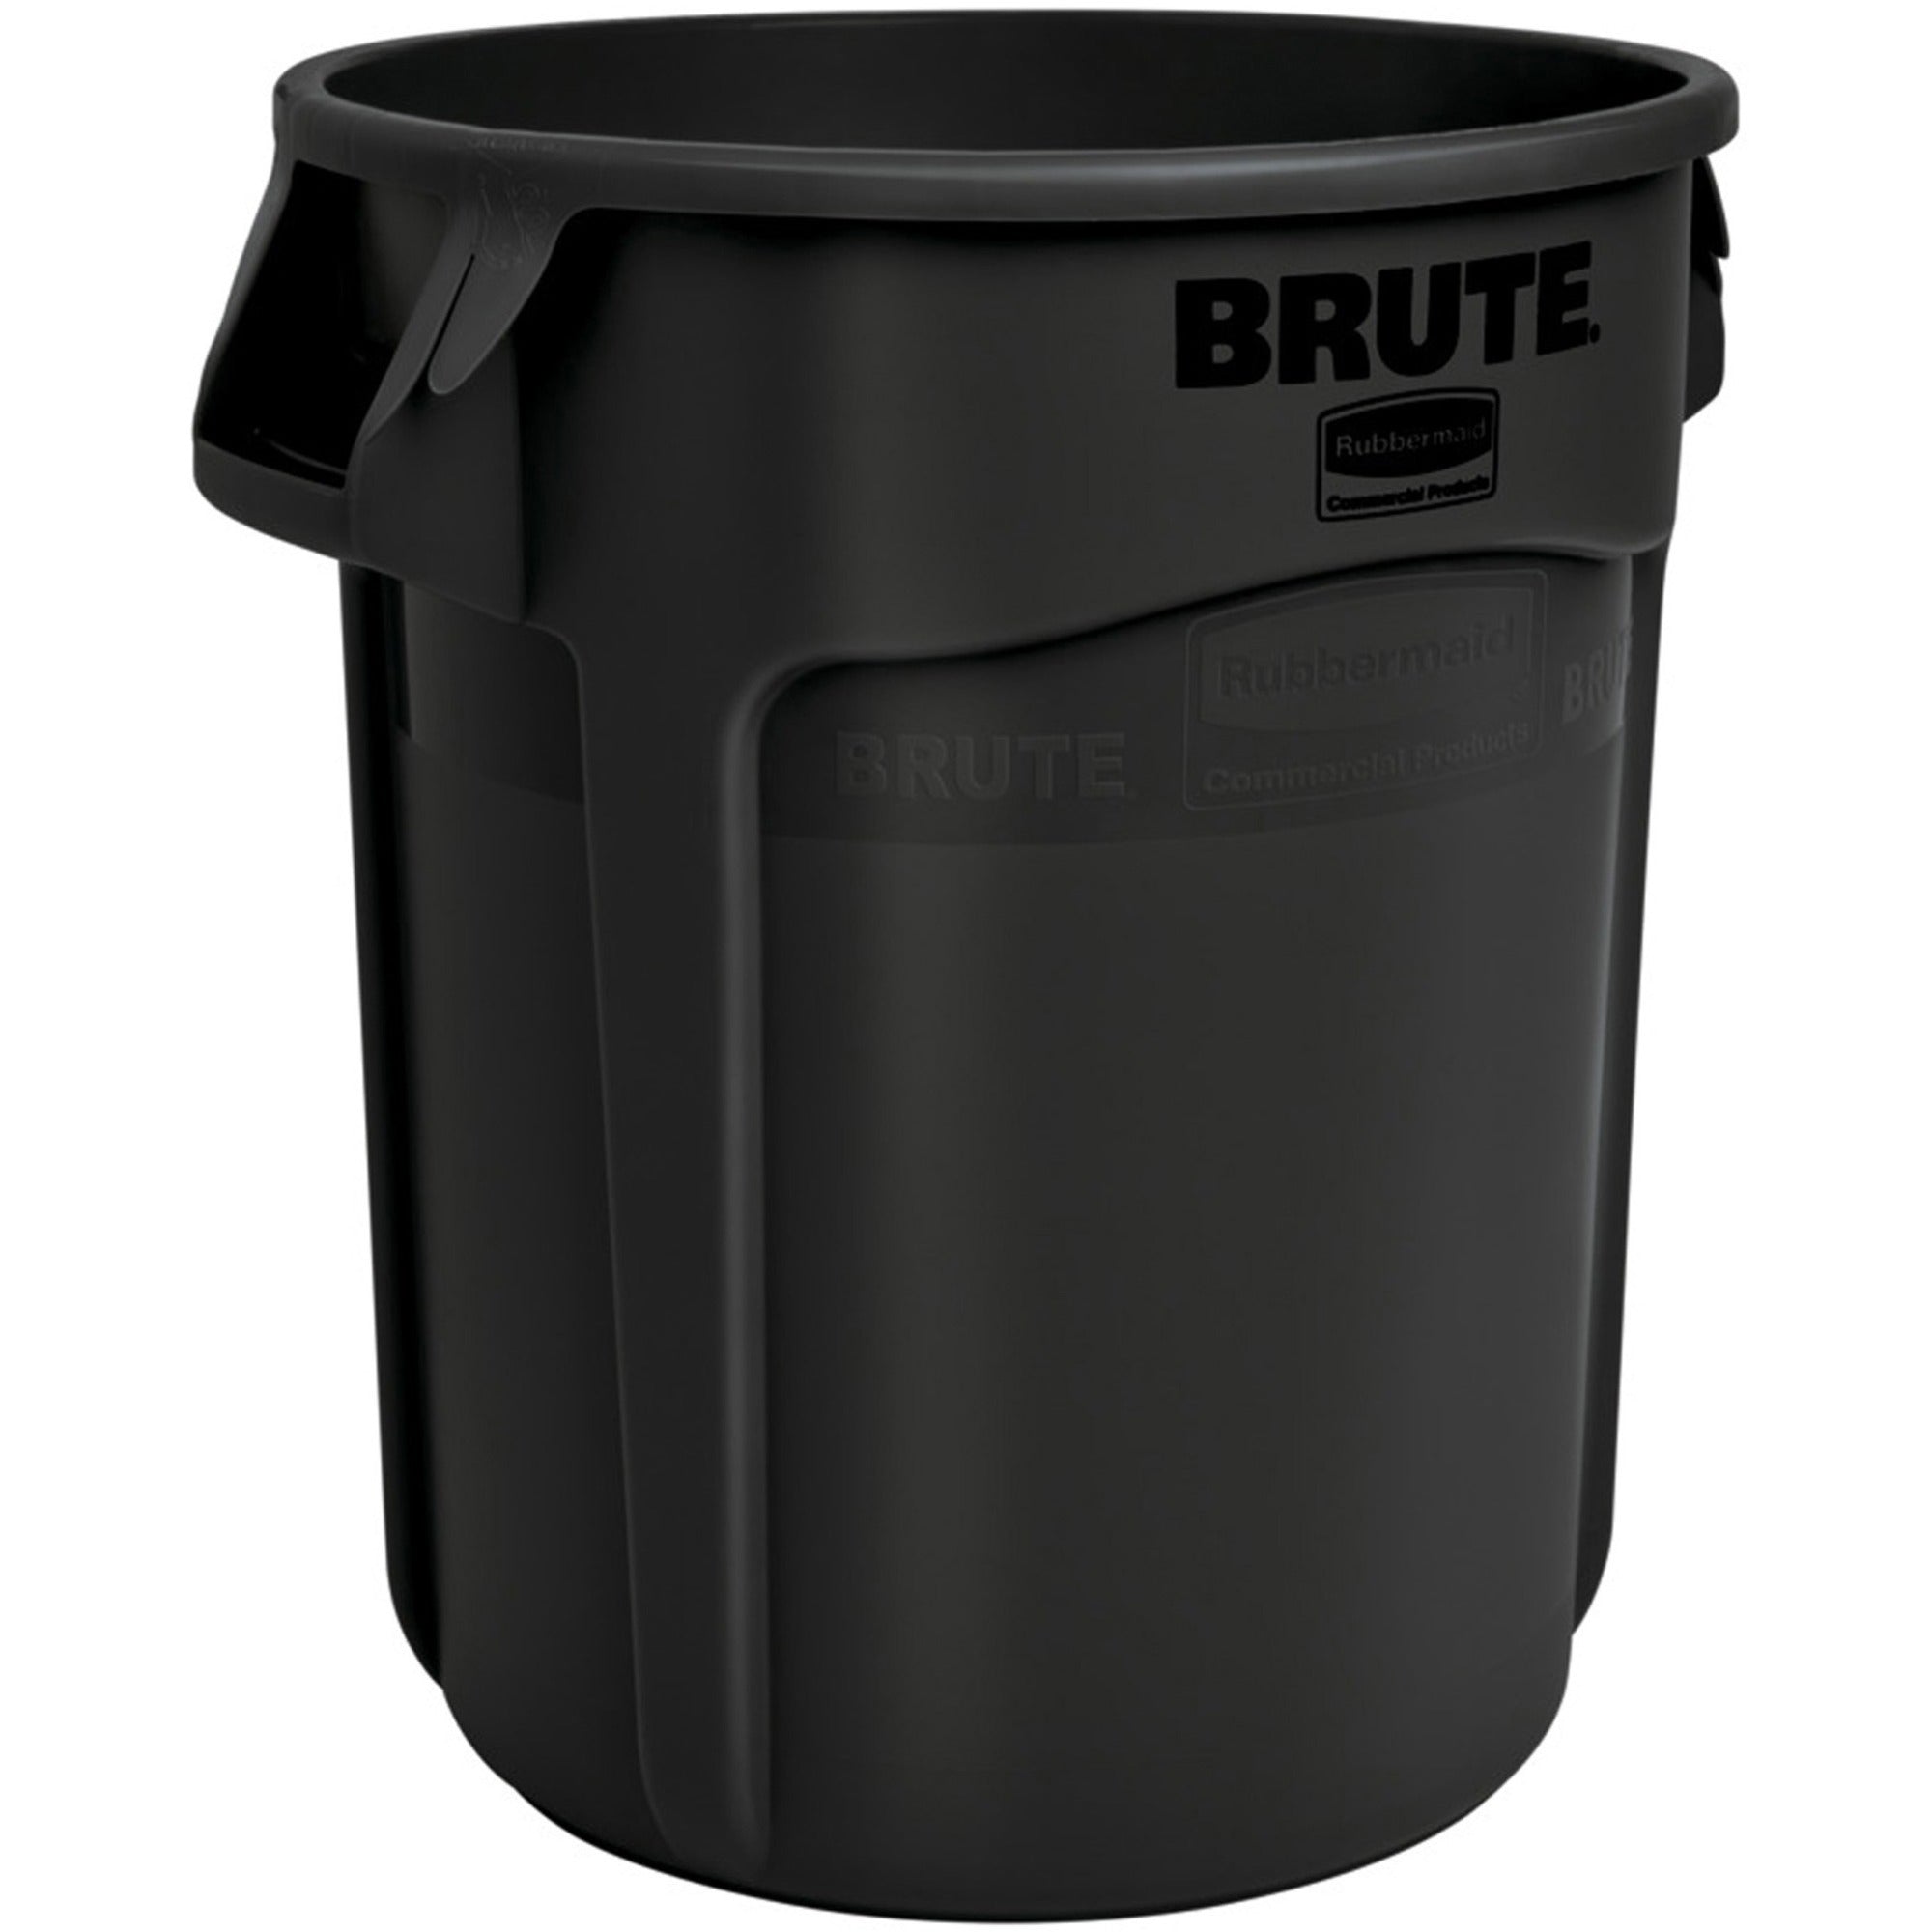 rubbermaid-commercial-brute-55-gallon-container-55-gal-capacity-round-uv-resistant-vented-fade-resistant-crack-resistant-crush-resistant-warp-resistant-reinforced-base-durable-tear-resistant-damage-resistant-contoured-base-handle-_rcp1779739 - 1